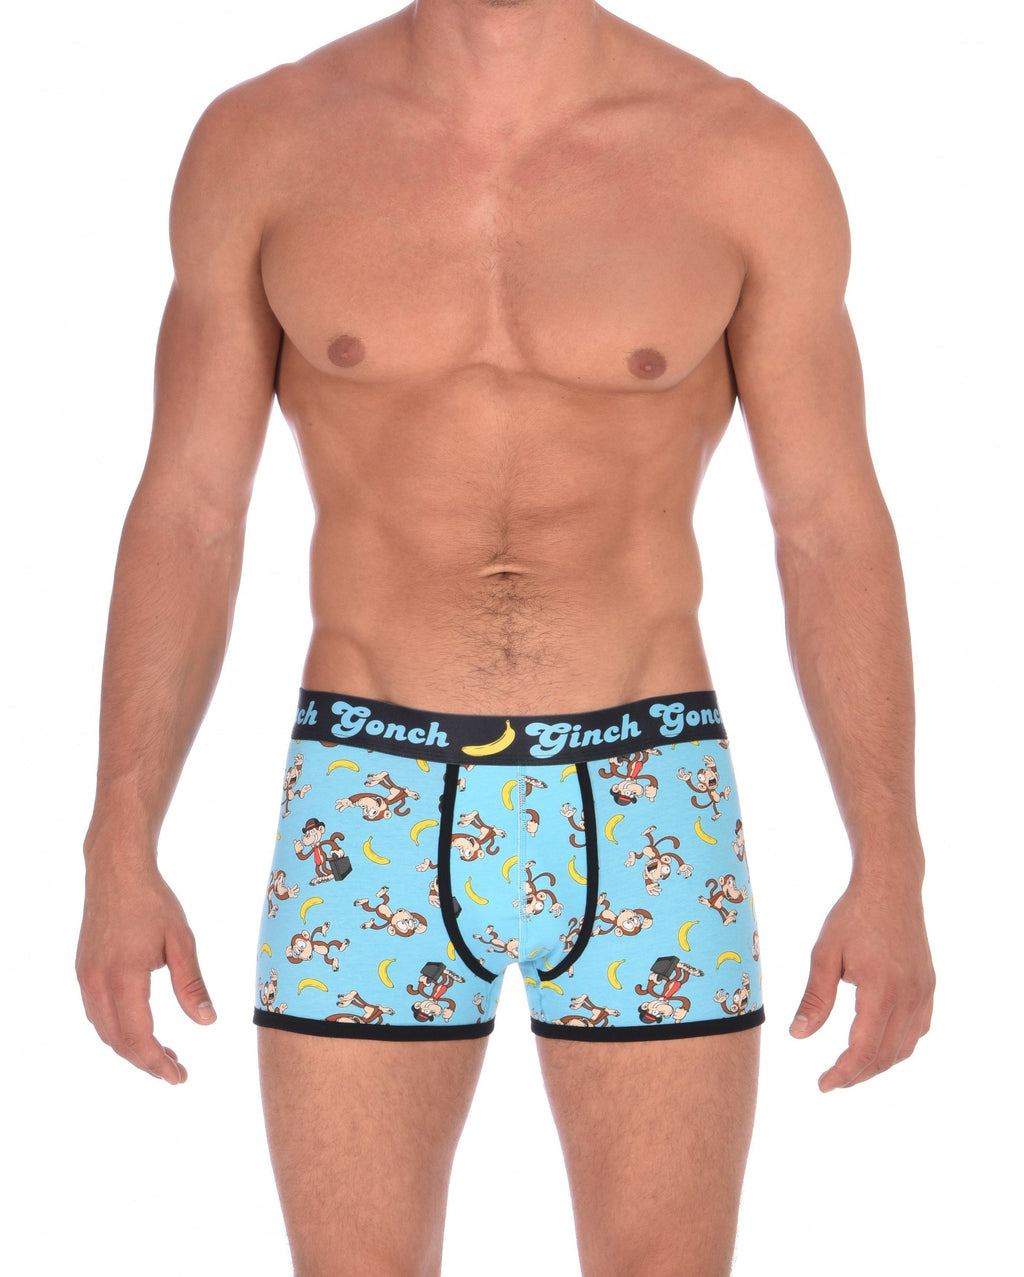 Ginch Gonch Monkey Business Men's Underwear Boxer Brief, Trunk, with blue background, monkeys, and bananas. Black trim and printed waistband with Ginch Gonch and bananas. Front